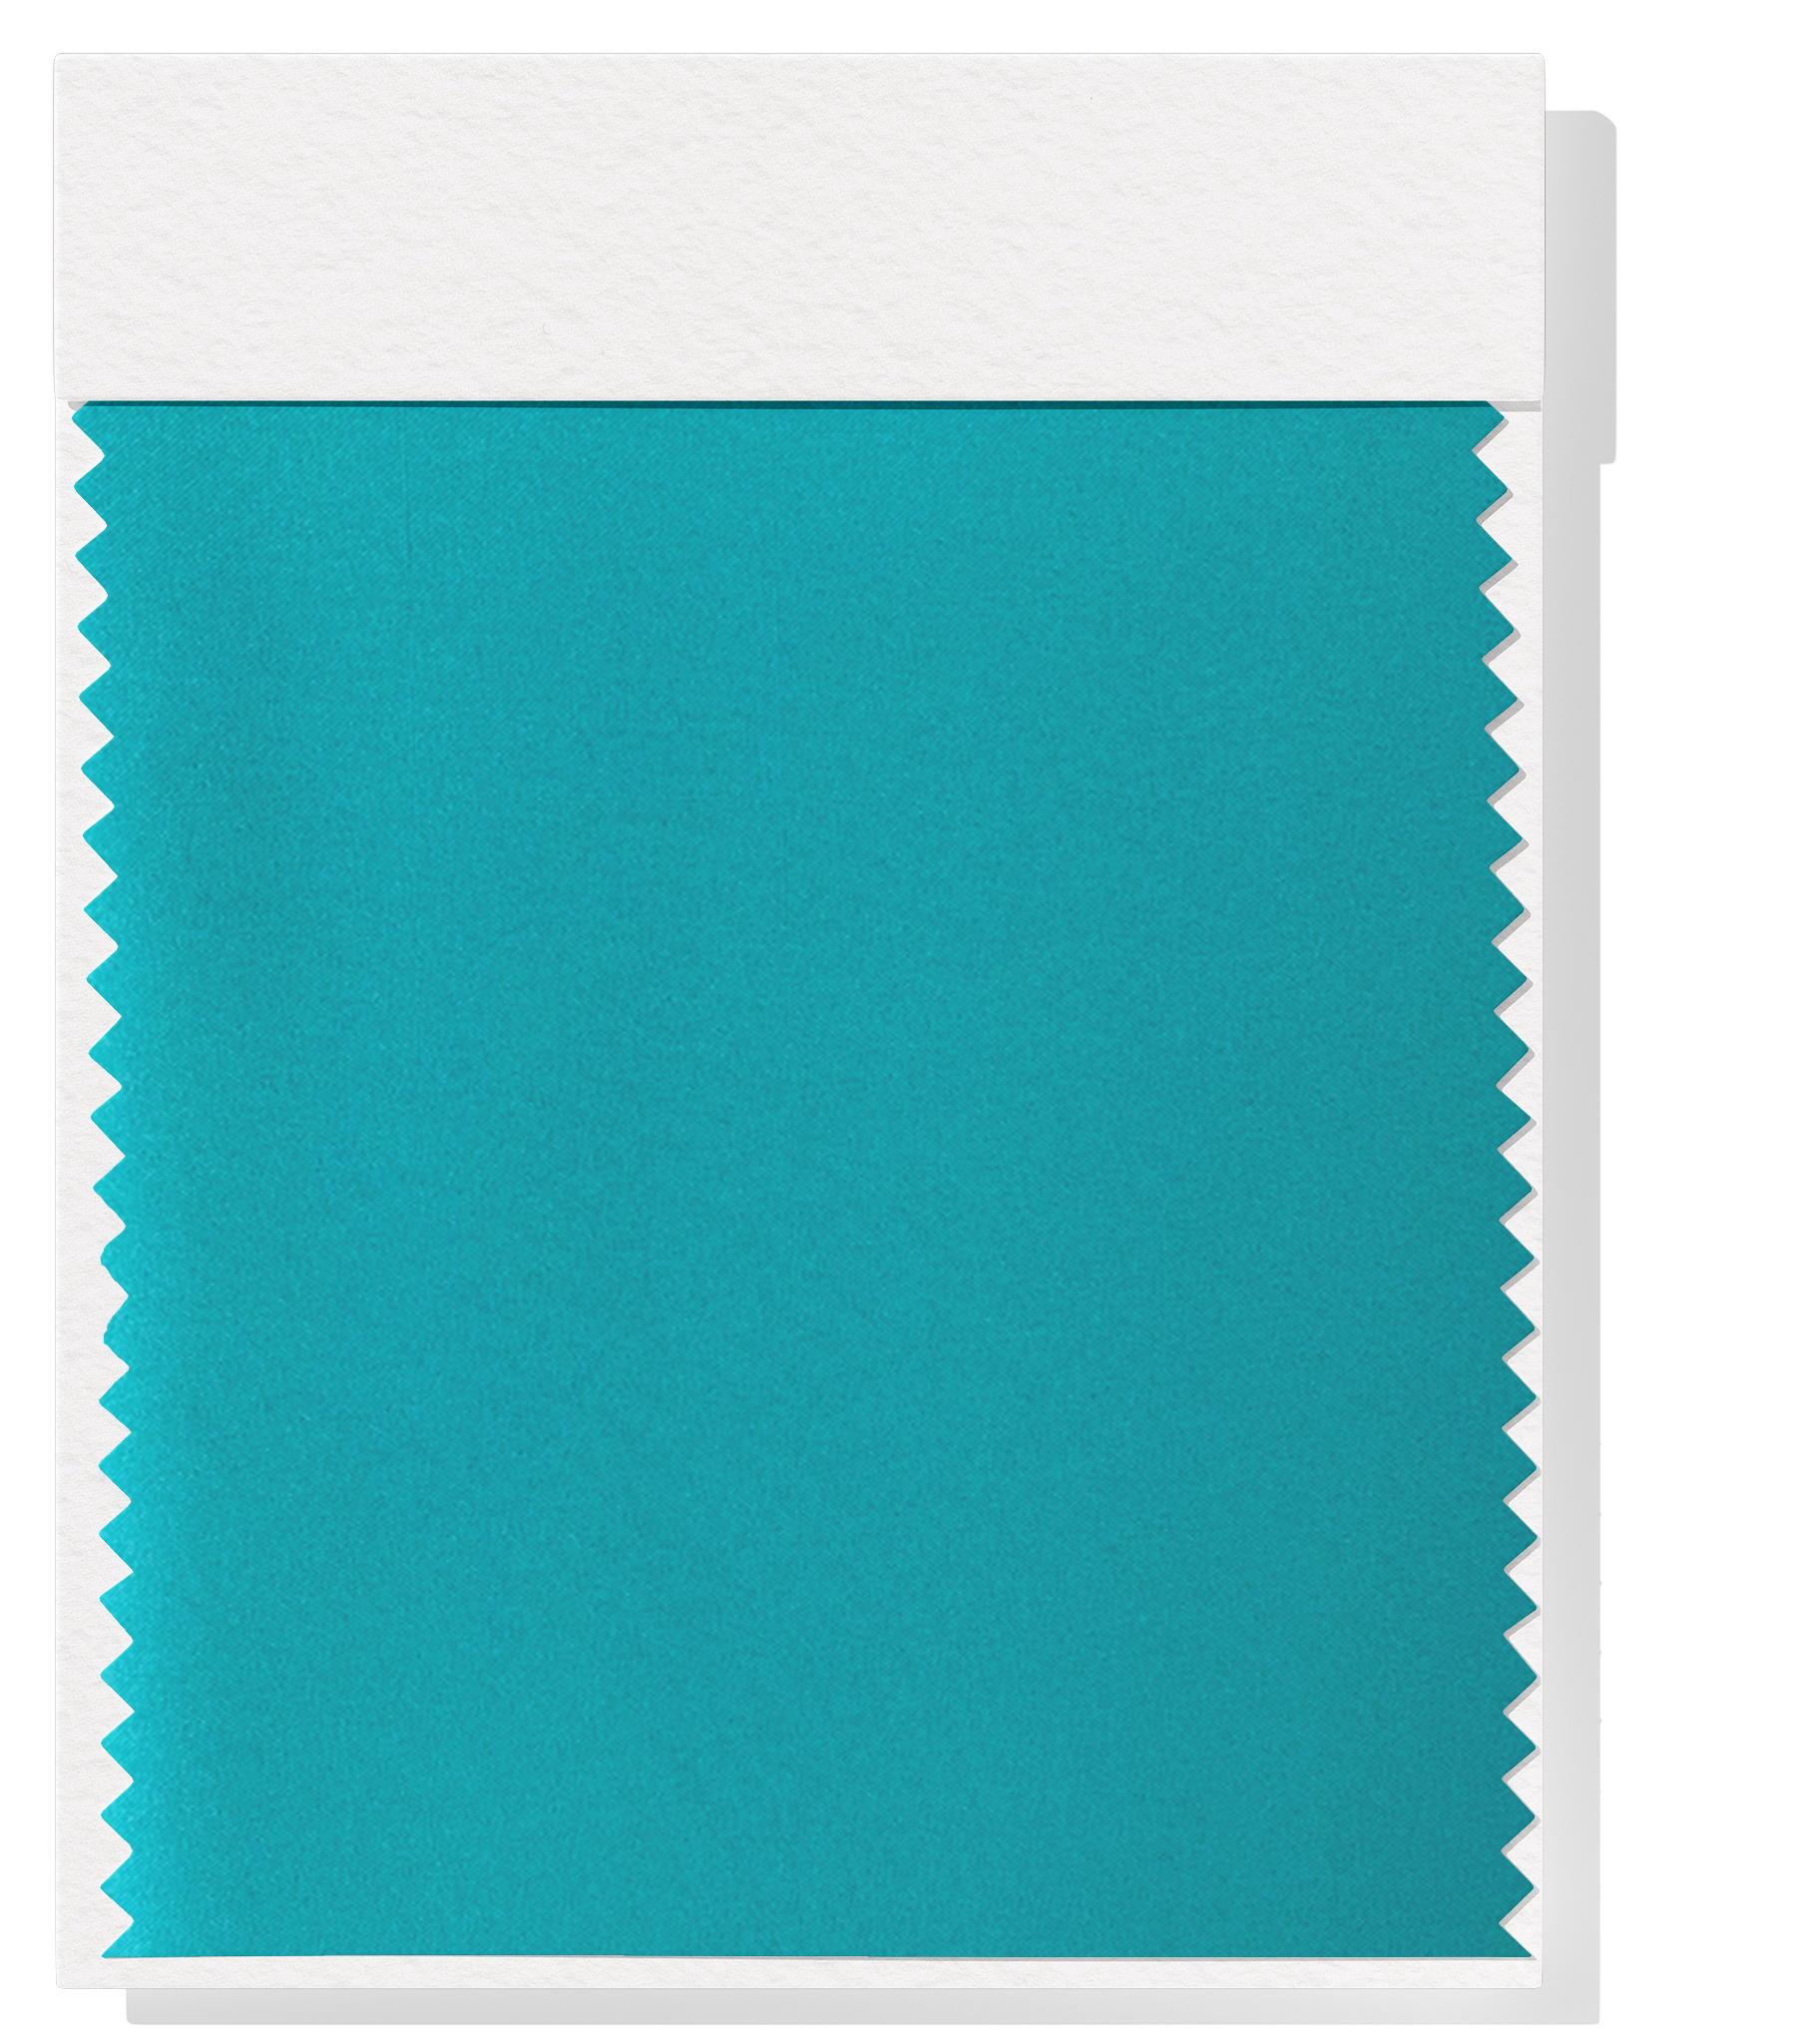 Mechanical Stretch $5.00p/m - Turquoise